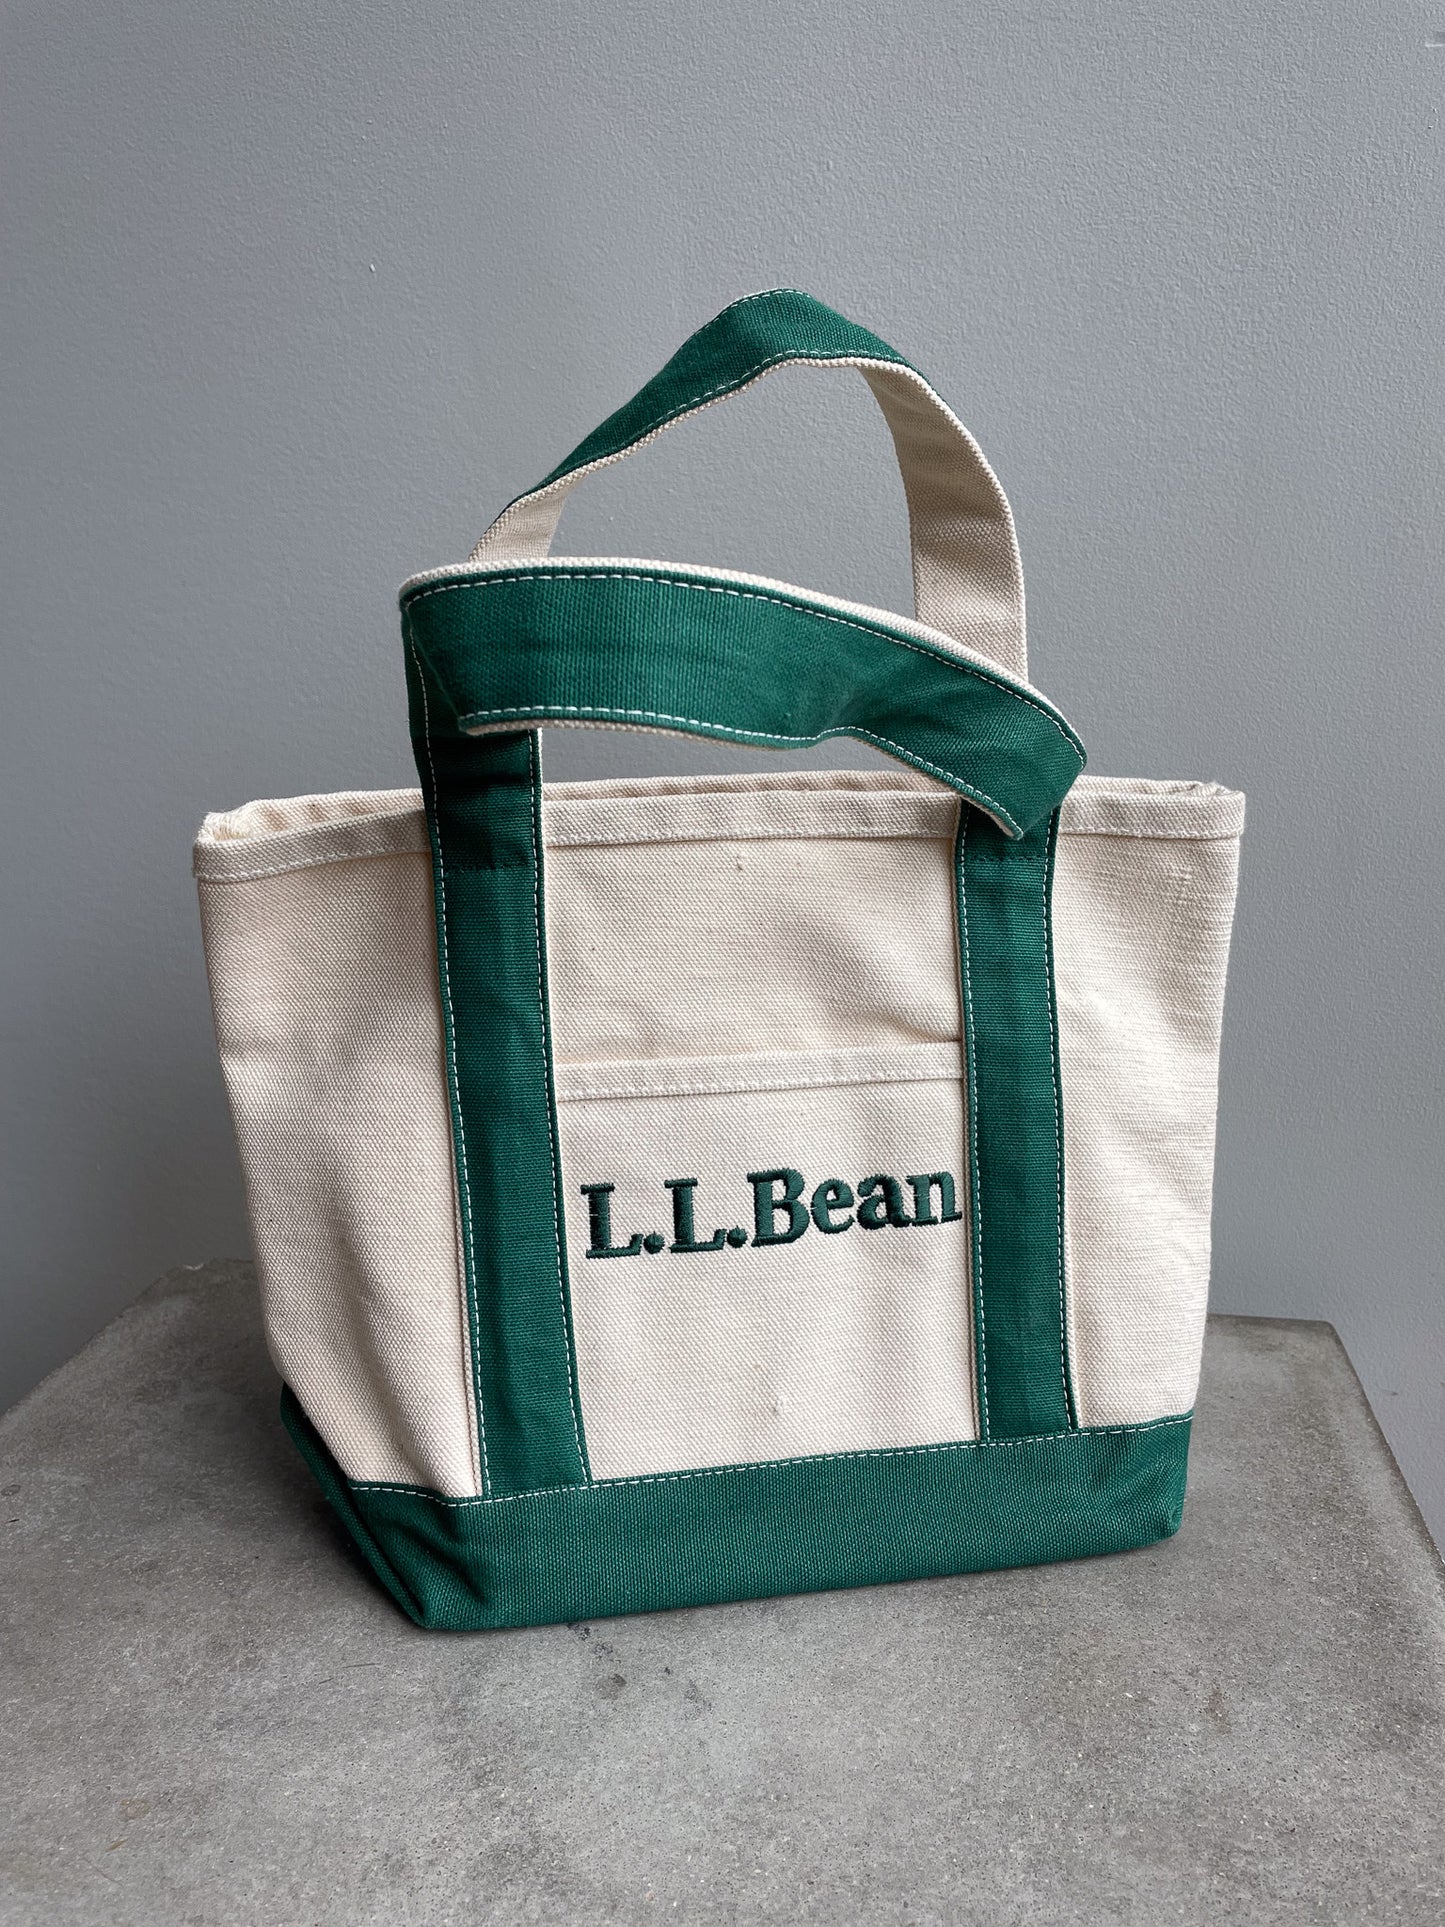 Vintage LL Bean Boat and Tote Canvas Bag Made in Usa 